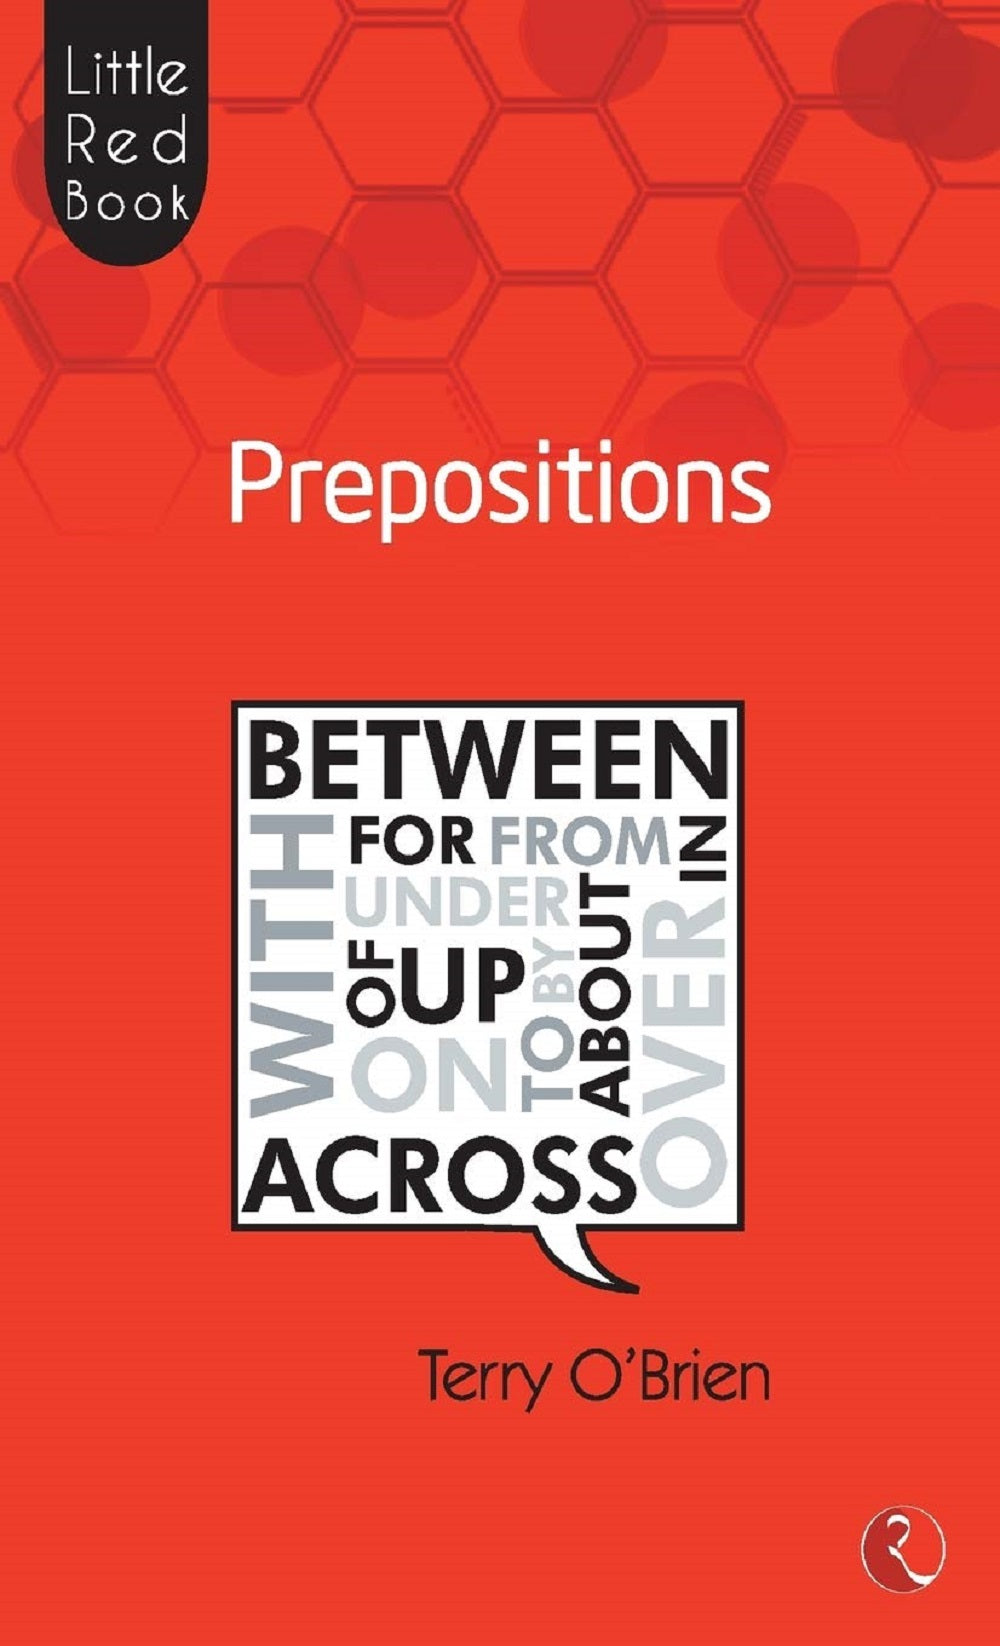 LITTLE RED BOOK PREPOSITIONS